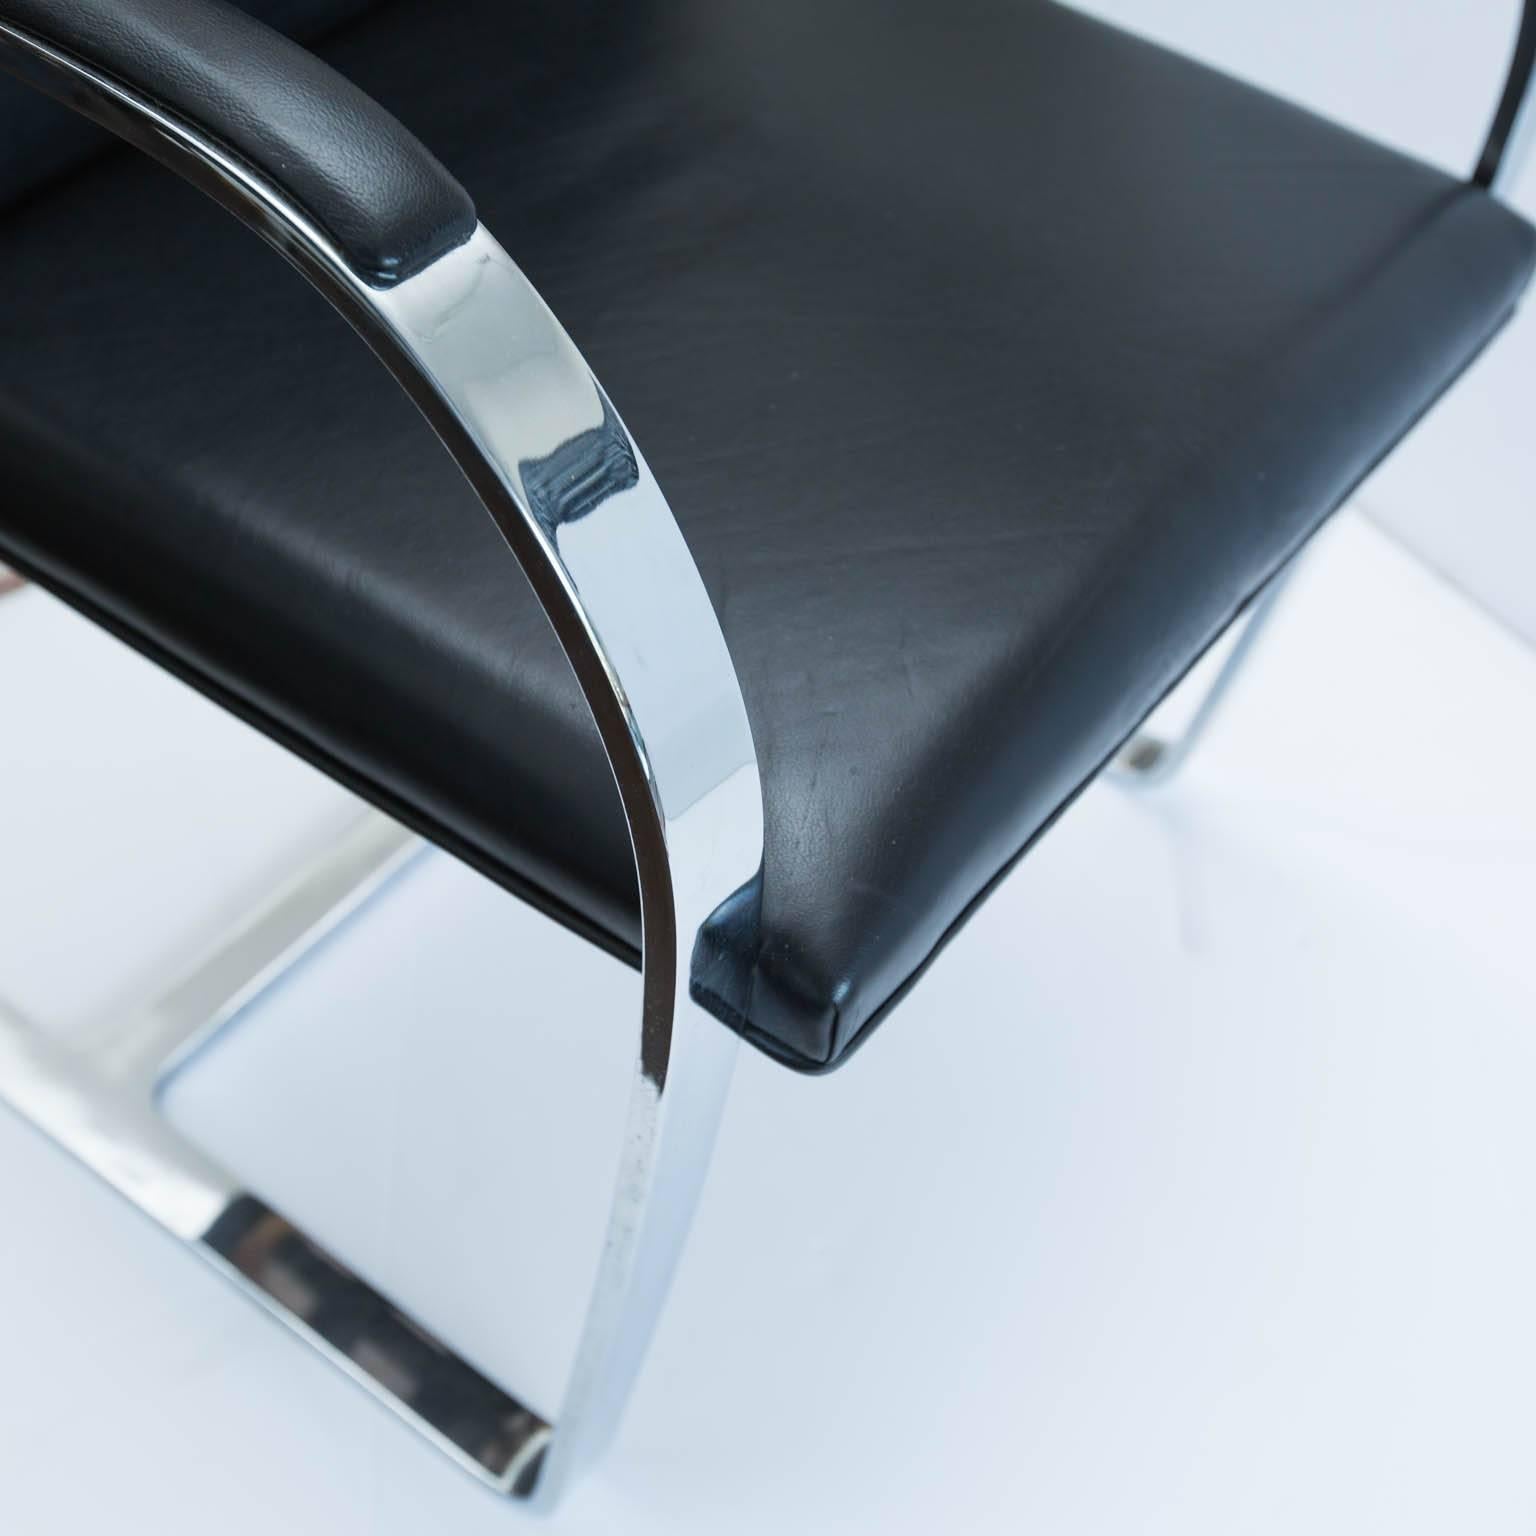 Fresh from the boardroom of corporate America, these chairs are in pretty clean shape and ready for your next meeting.